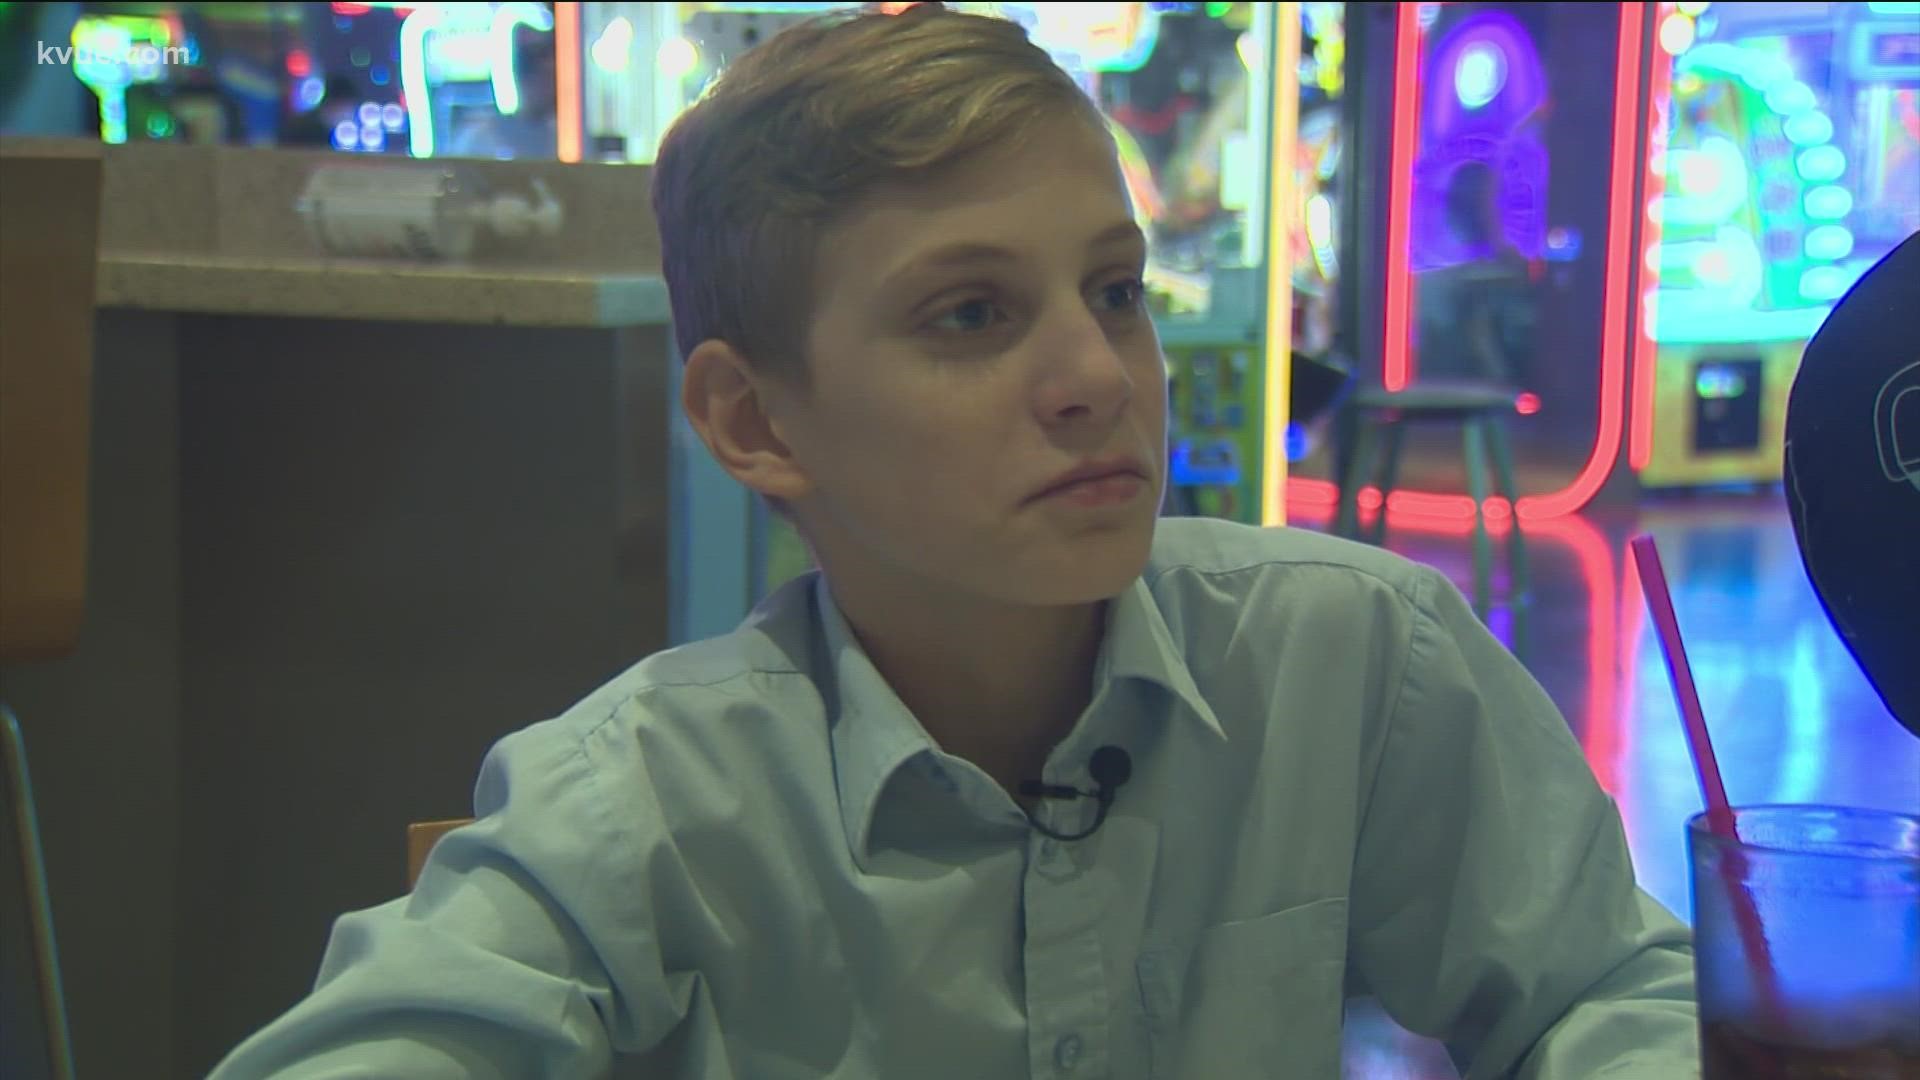 Every day, nearly 1,000 children in Central Texas wait and hope for a permanent home. This 13-year-old is trying to hit a strike with his future family.